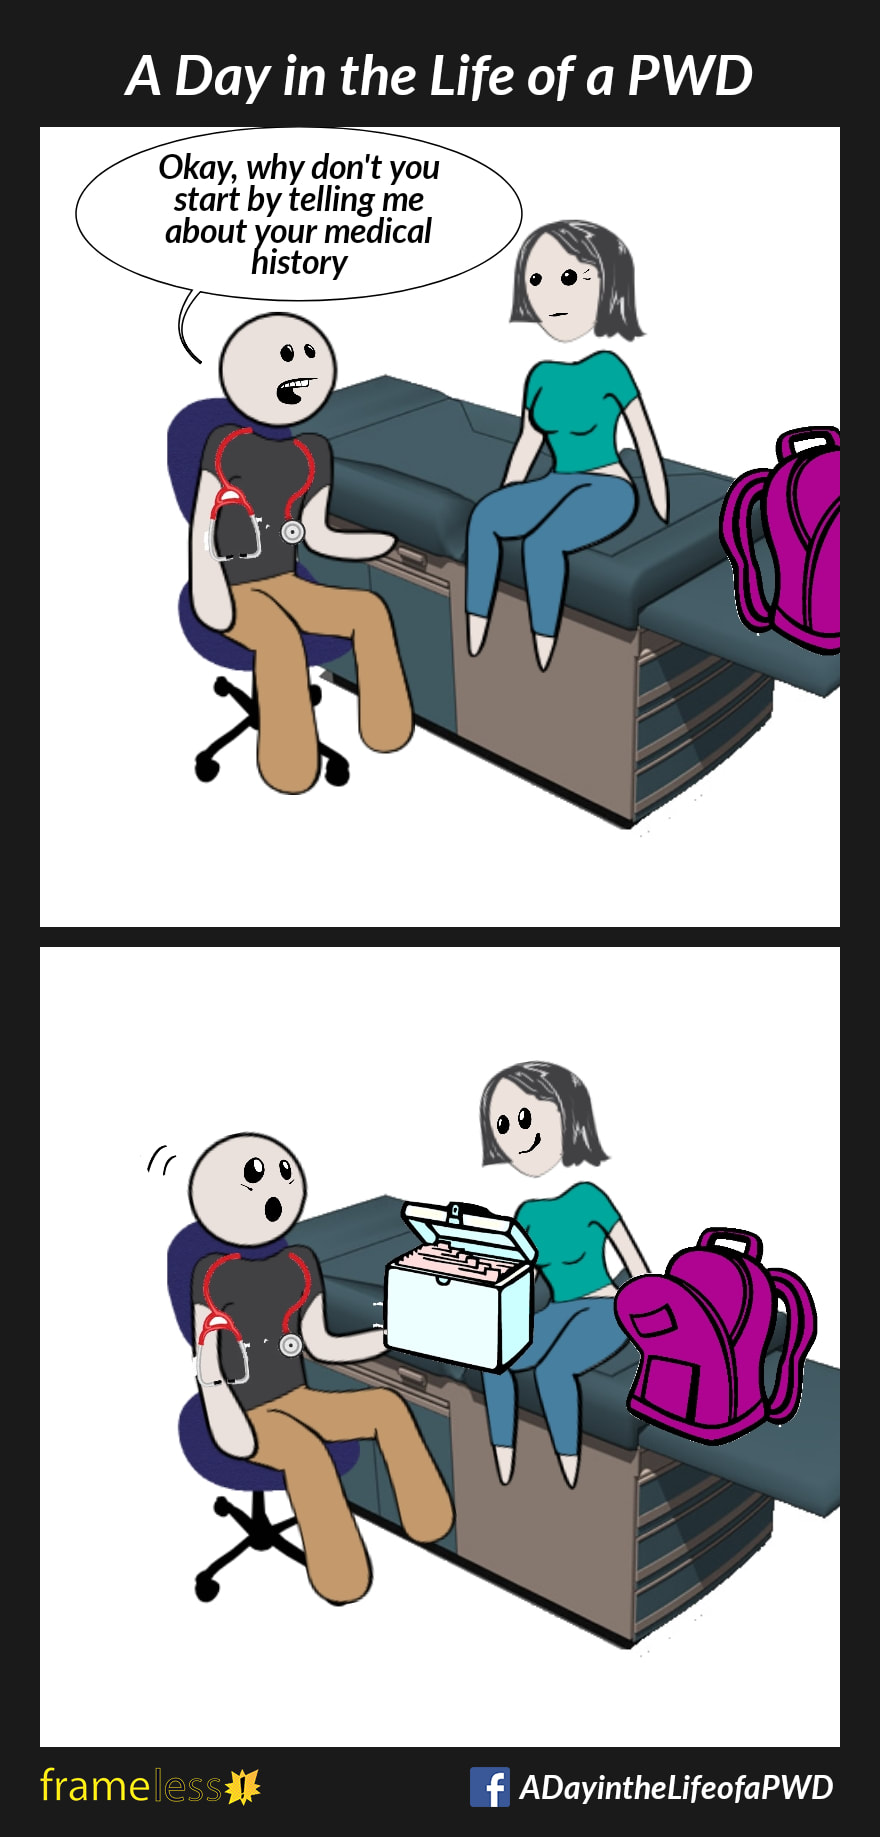 COMIC STRIP 
A Day in the Life of a PWD (Person With a Disability) 

Frame 1:
A woman sits on an exam table talking with a new doctor.
DOCTOR: Okay, why don't you start with telling me about your medical history

Frame 2:
The woman pulls an unusually large box of medical files from her bag.